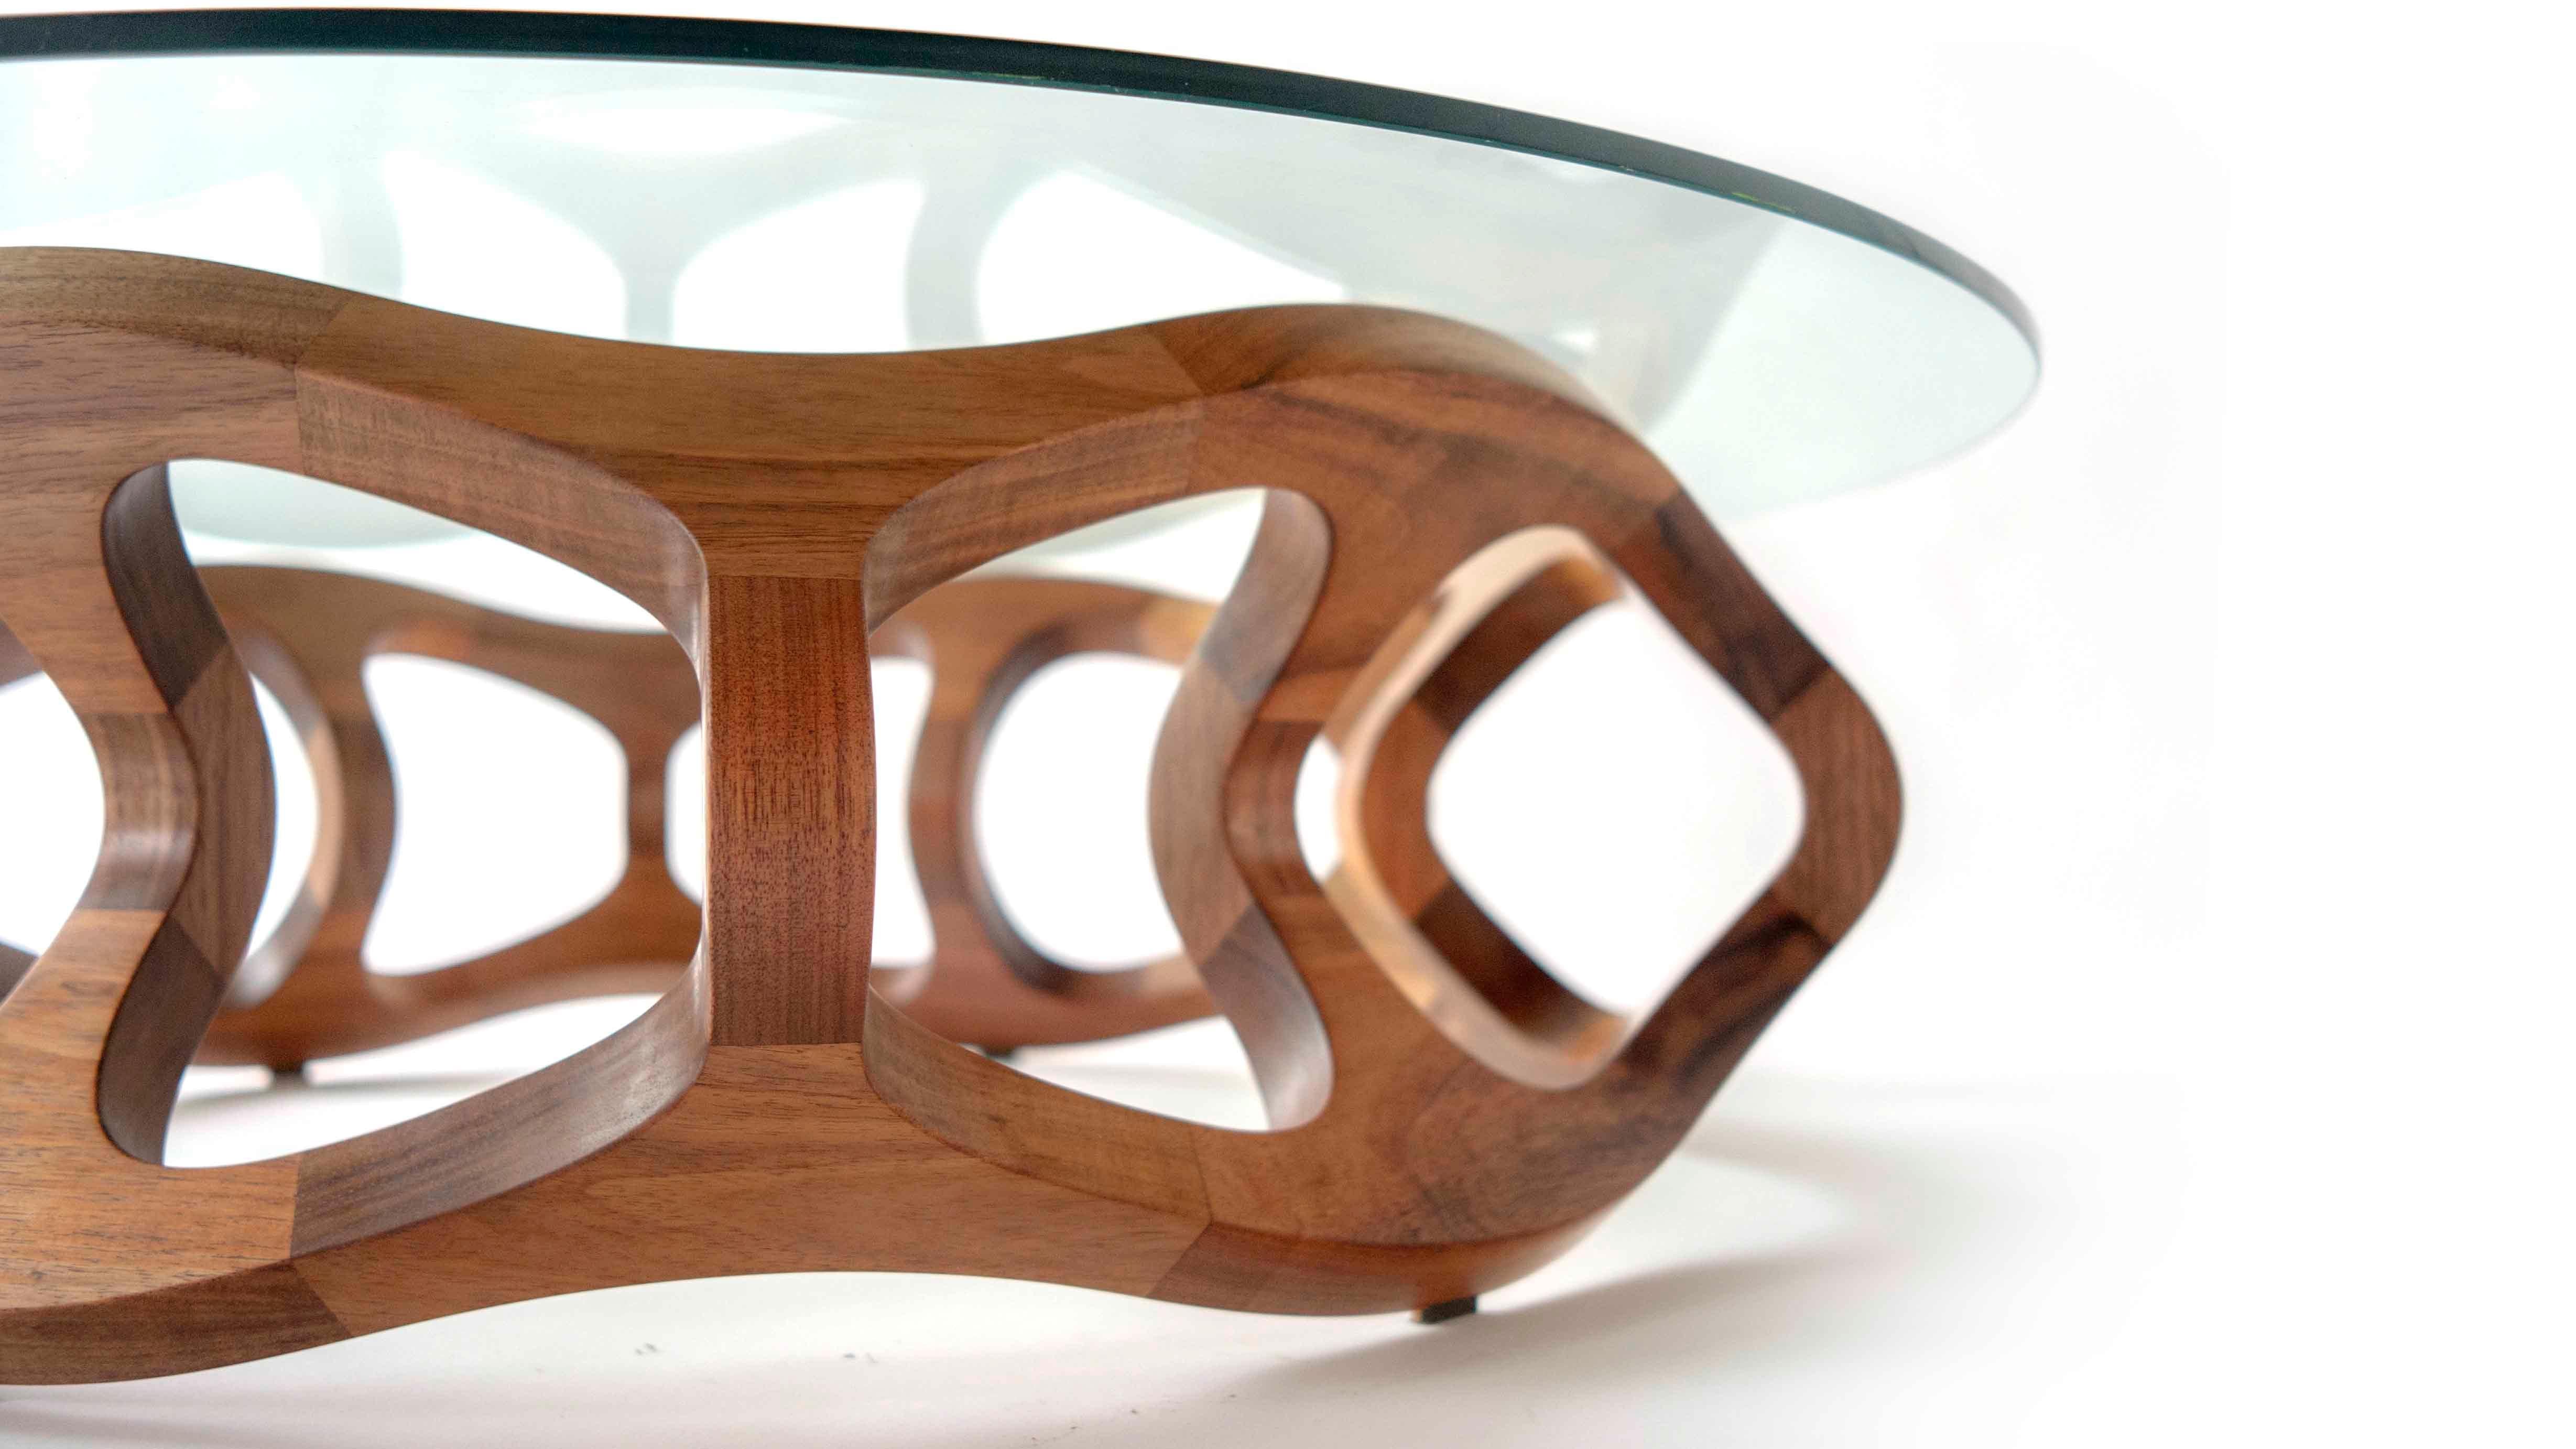 Toro G6, Geometric Sculptural Center Table Made of Solid Wood by Pedro Cerisola For Sale 3